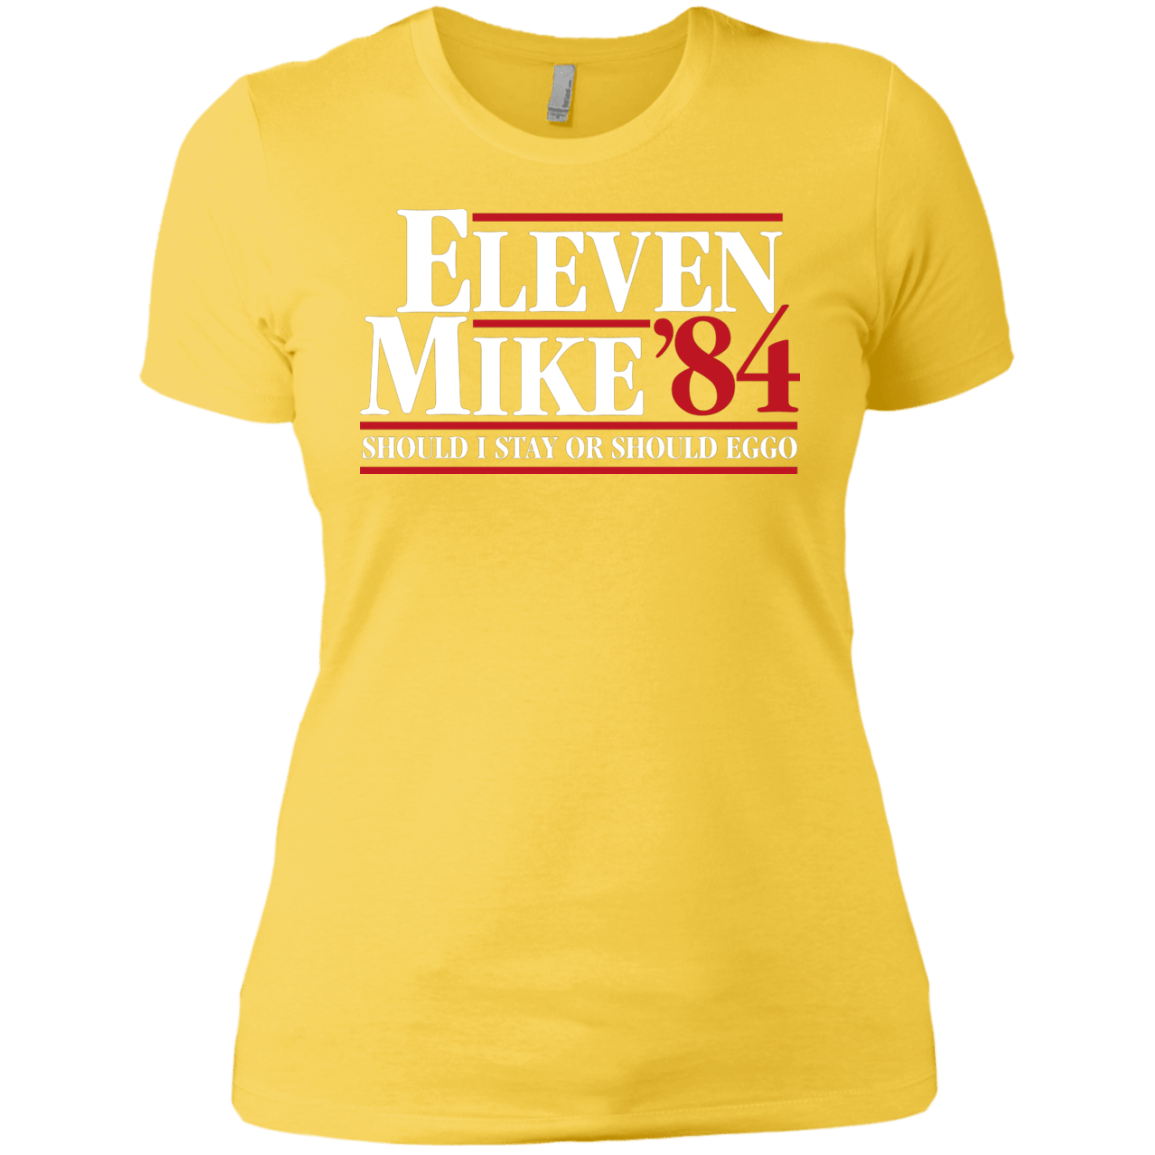 T-Shirts Vibrant Yellow / X-Small Eleven Mike 84 - Should I Stay or Should Eggo Women's Premium T-Shirt